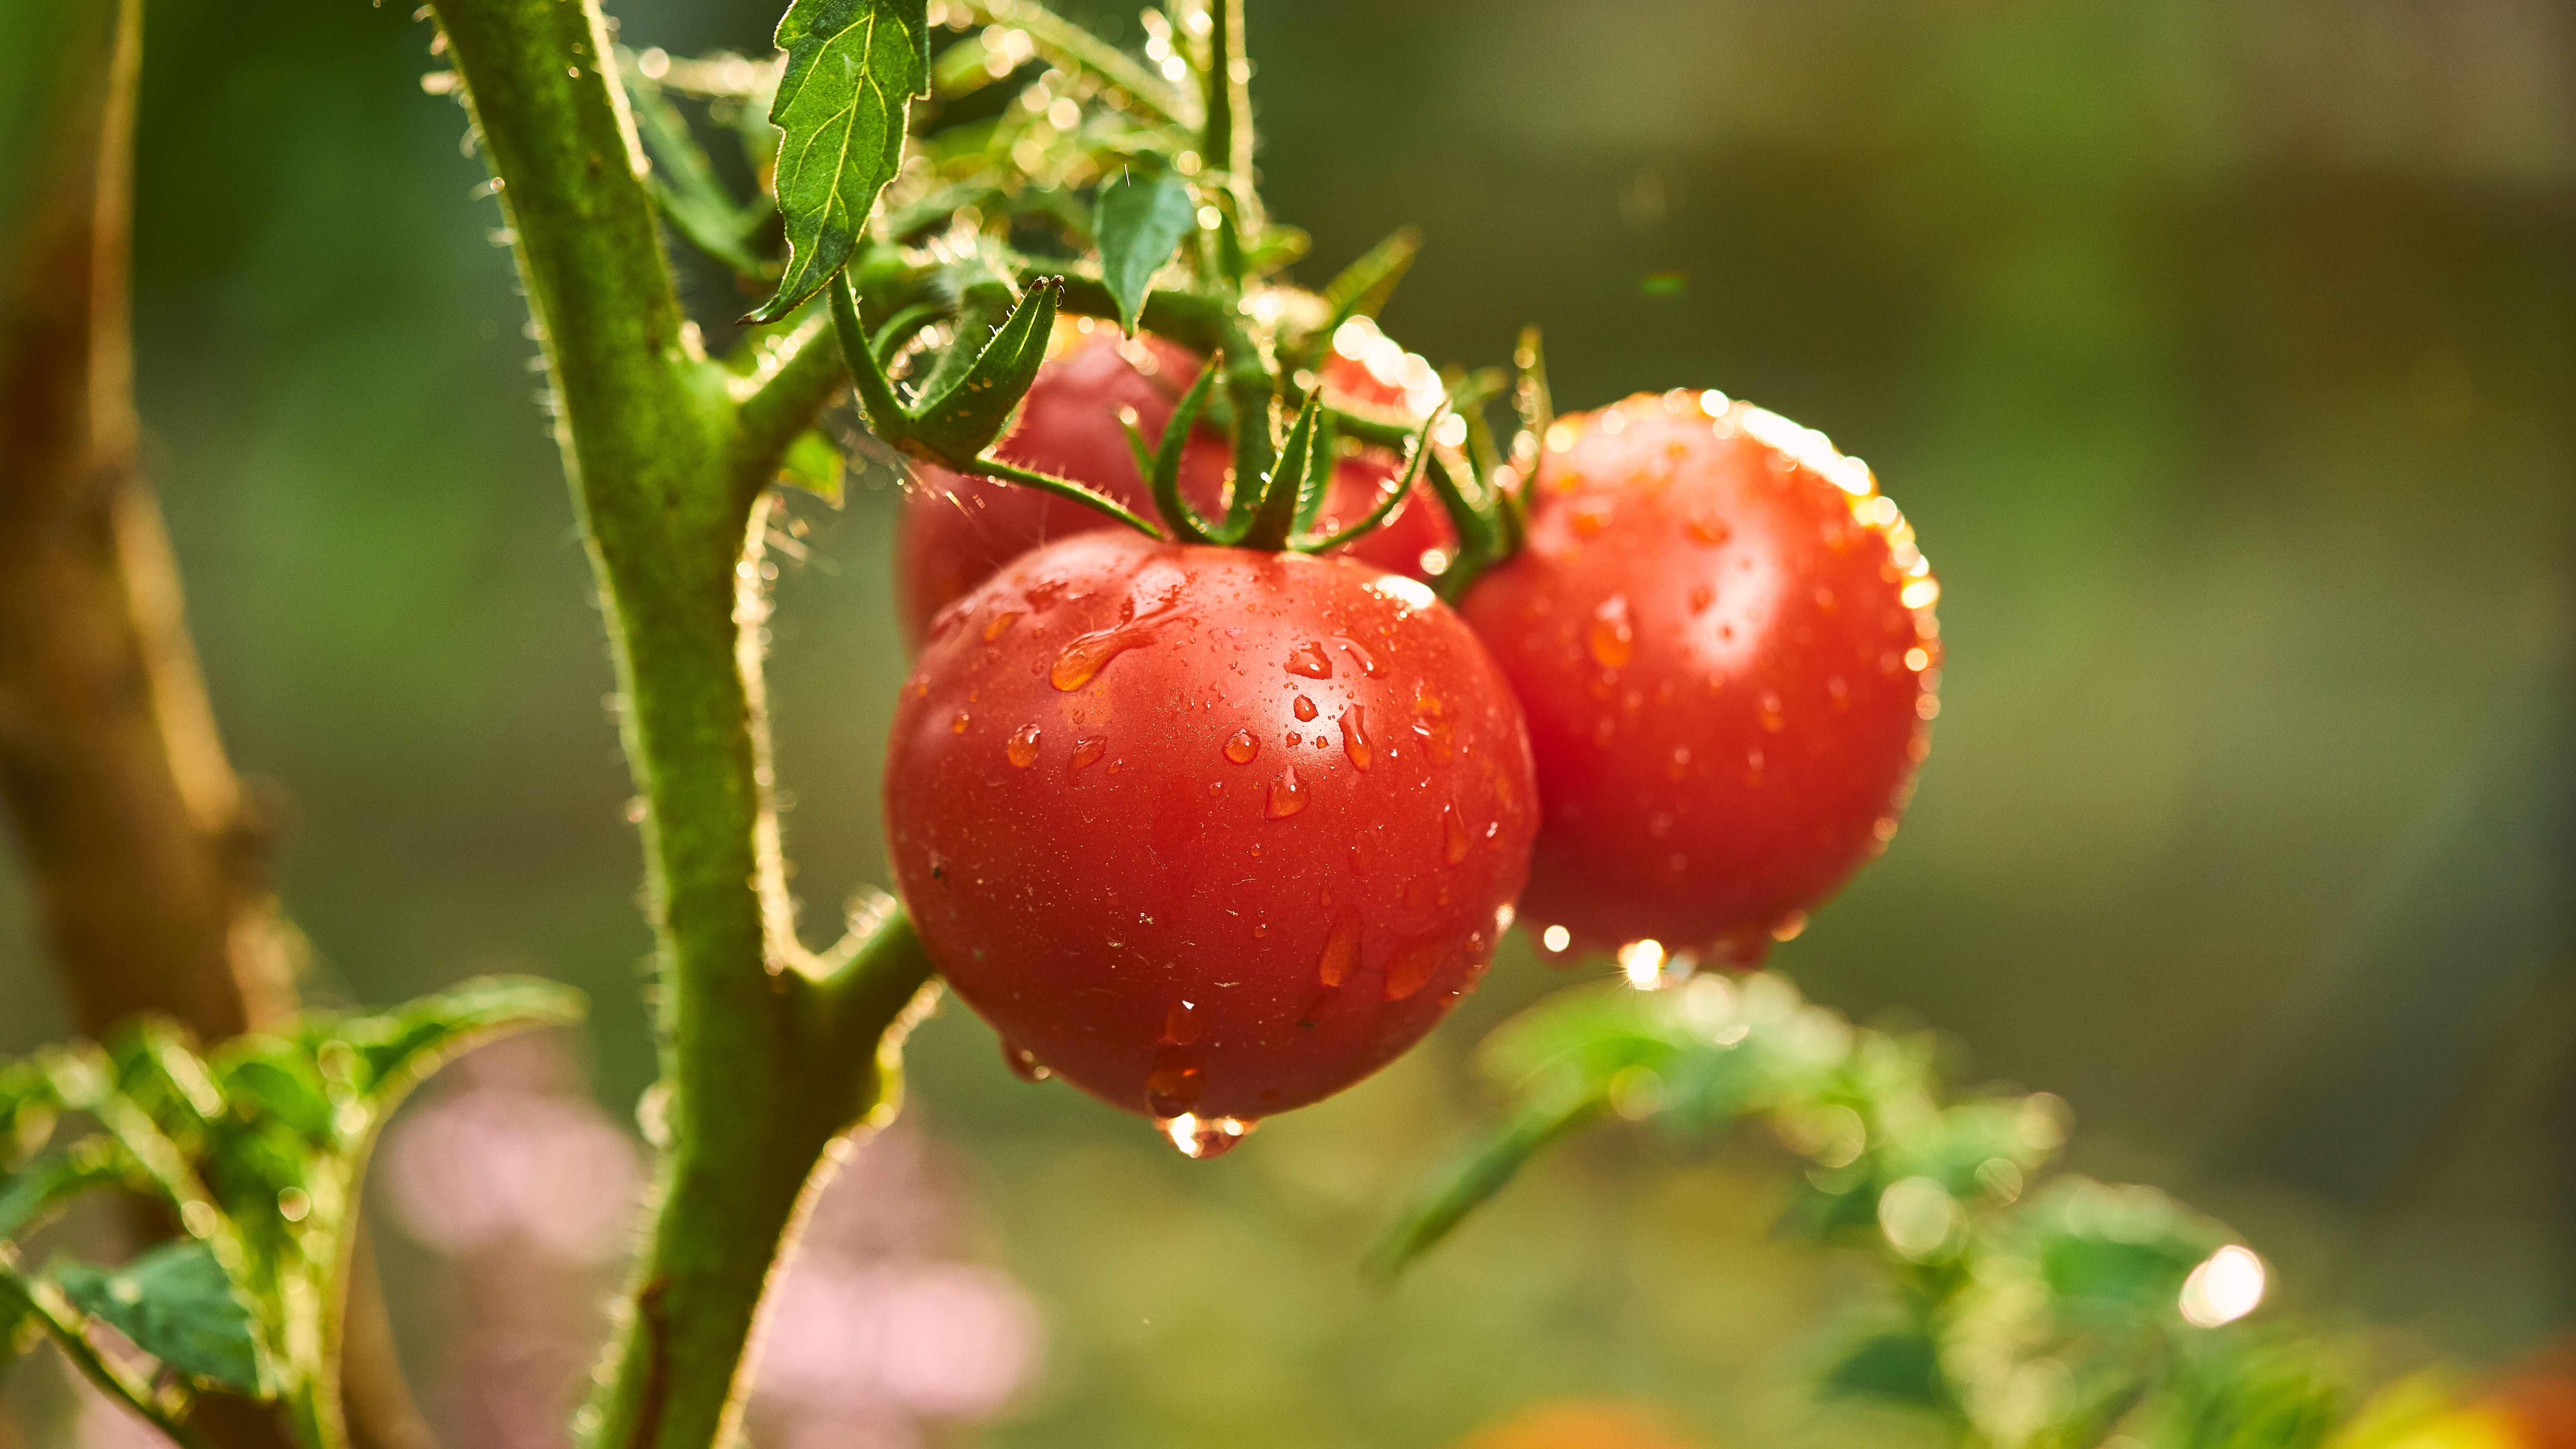 A tomato plant showing three ripe tomatoes covered with moisture